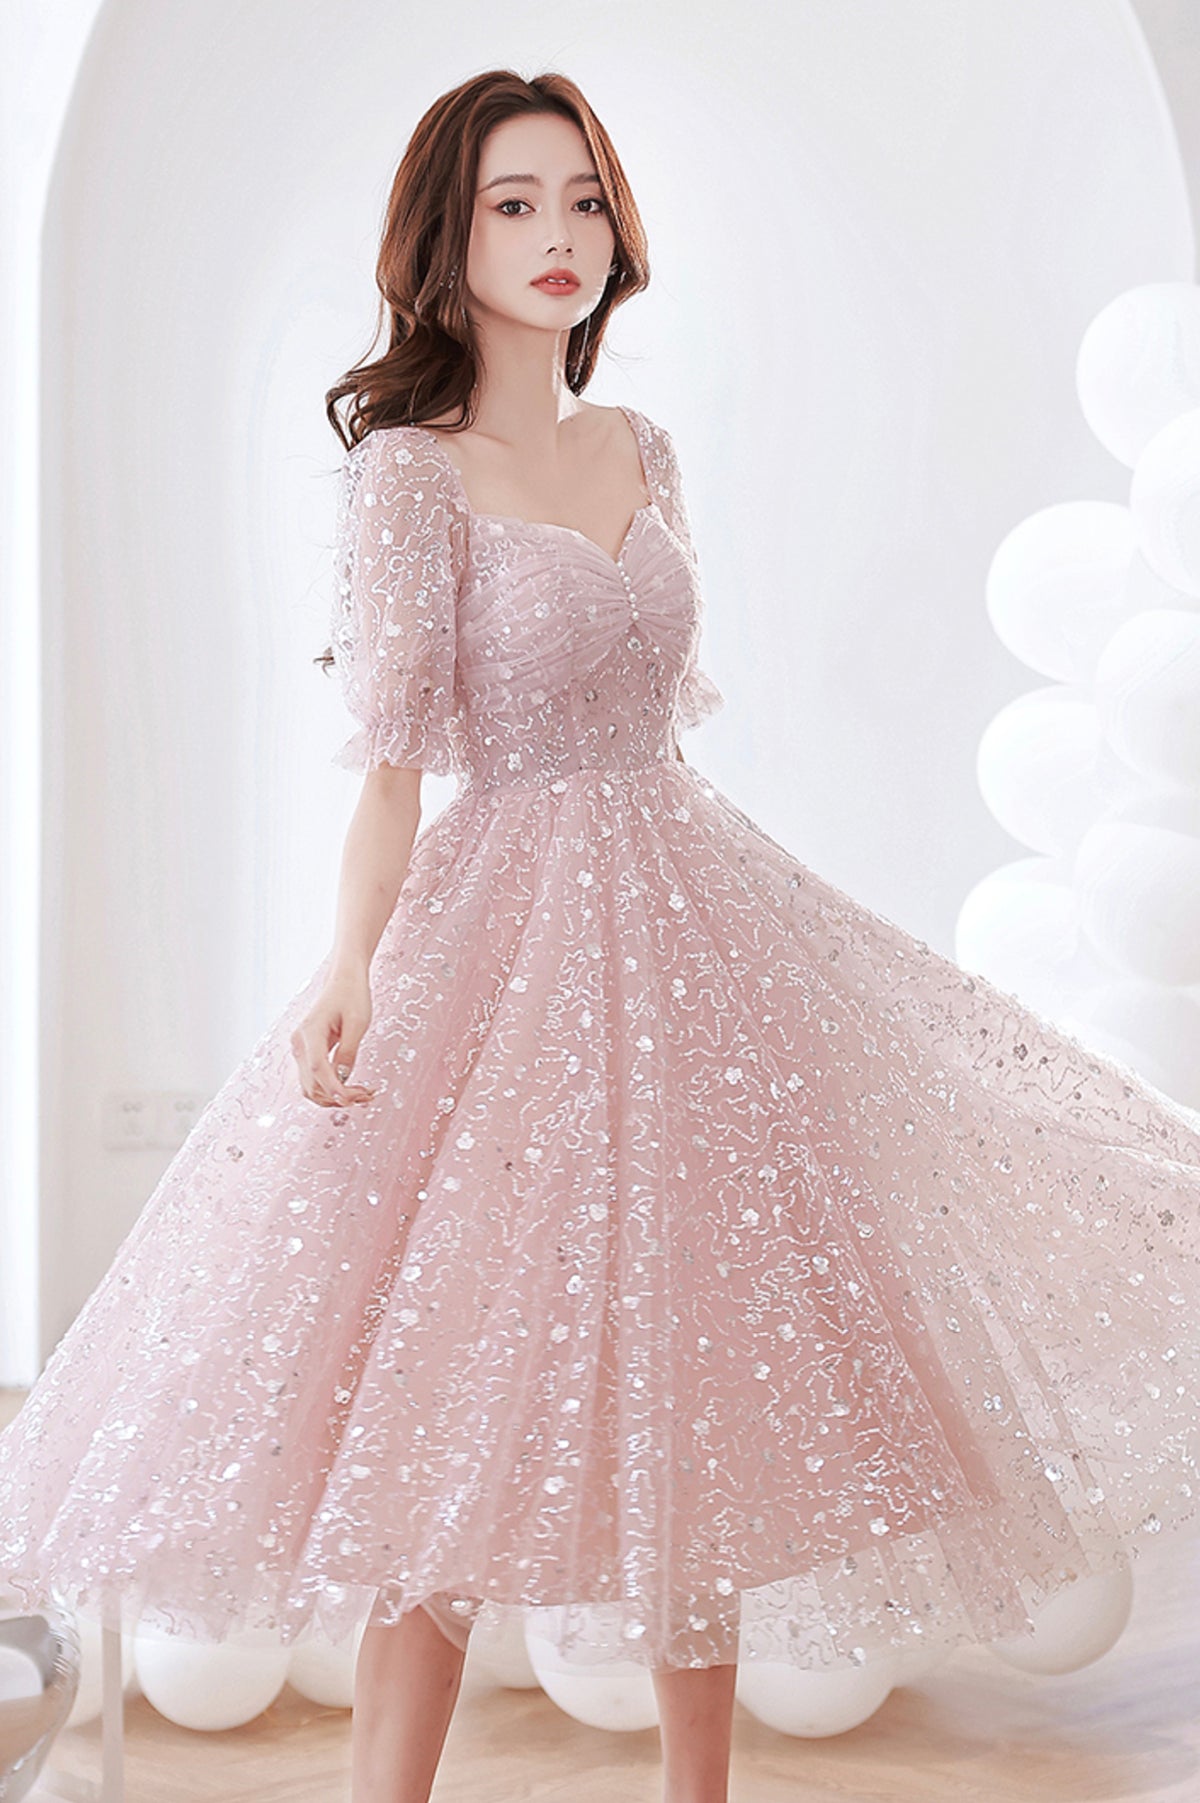 Pink Tulle Sequins Short A-Line Prom Dress, Cute Short Sleeve Evening Party Dress